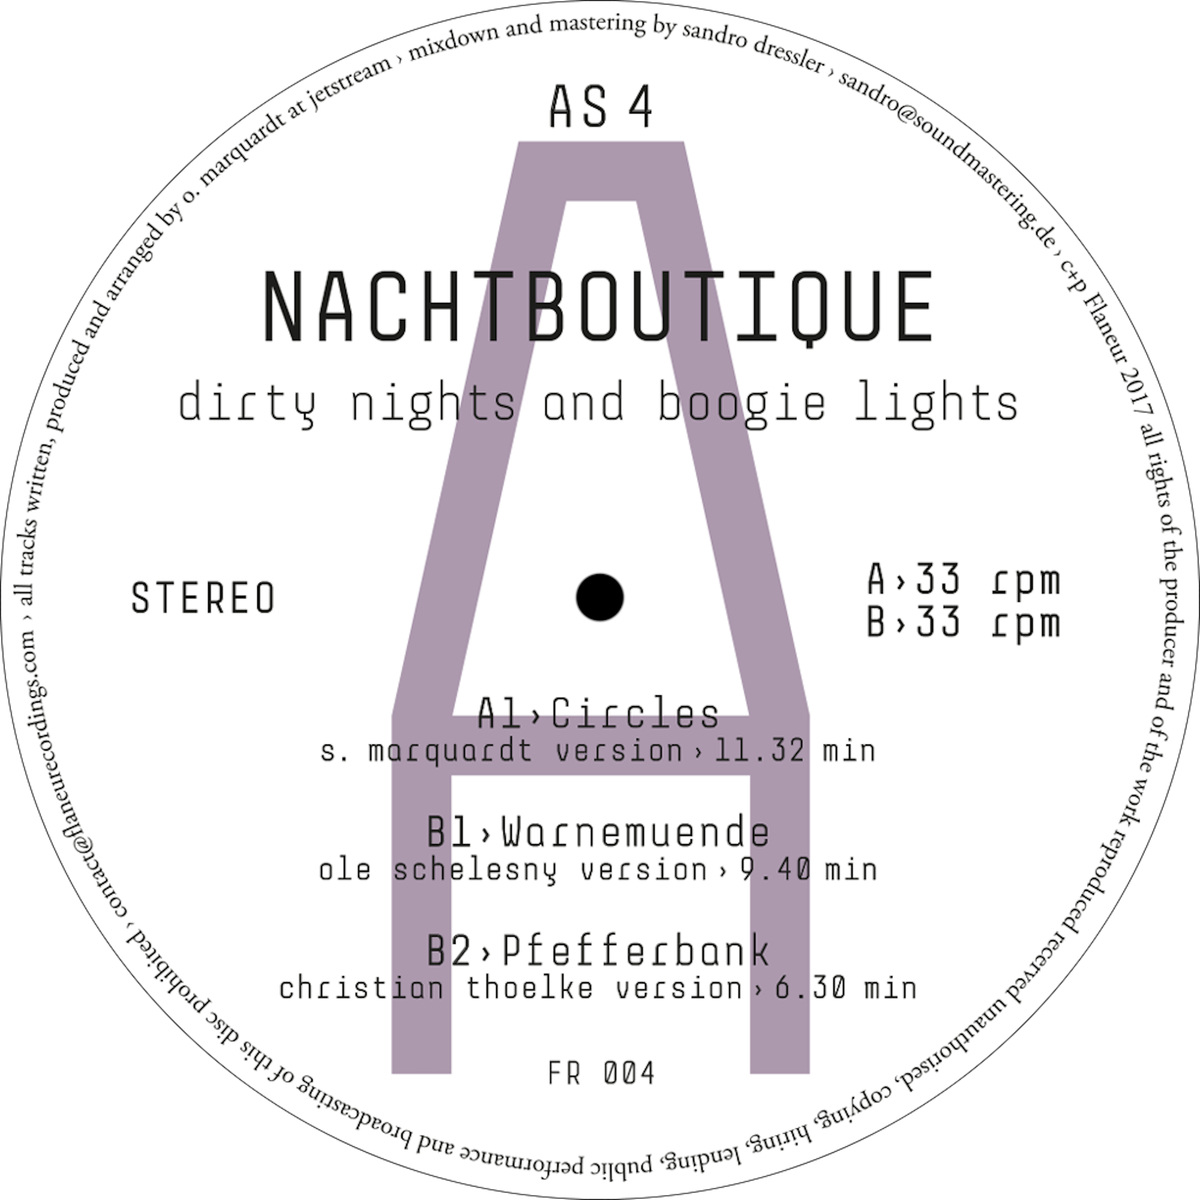 Nachtboutique - Dirty Night's and Boogie Light's Album Sampler 4 / Flaneur Records